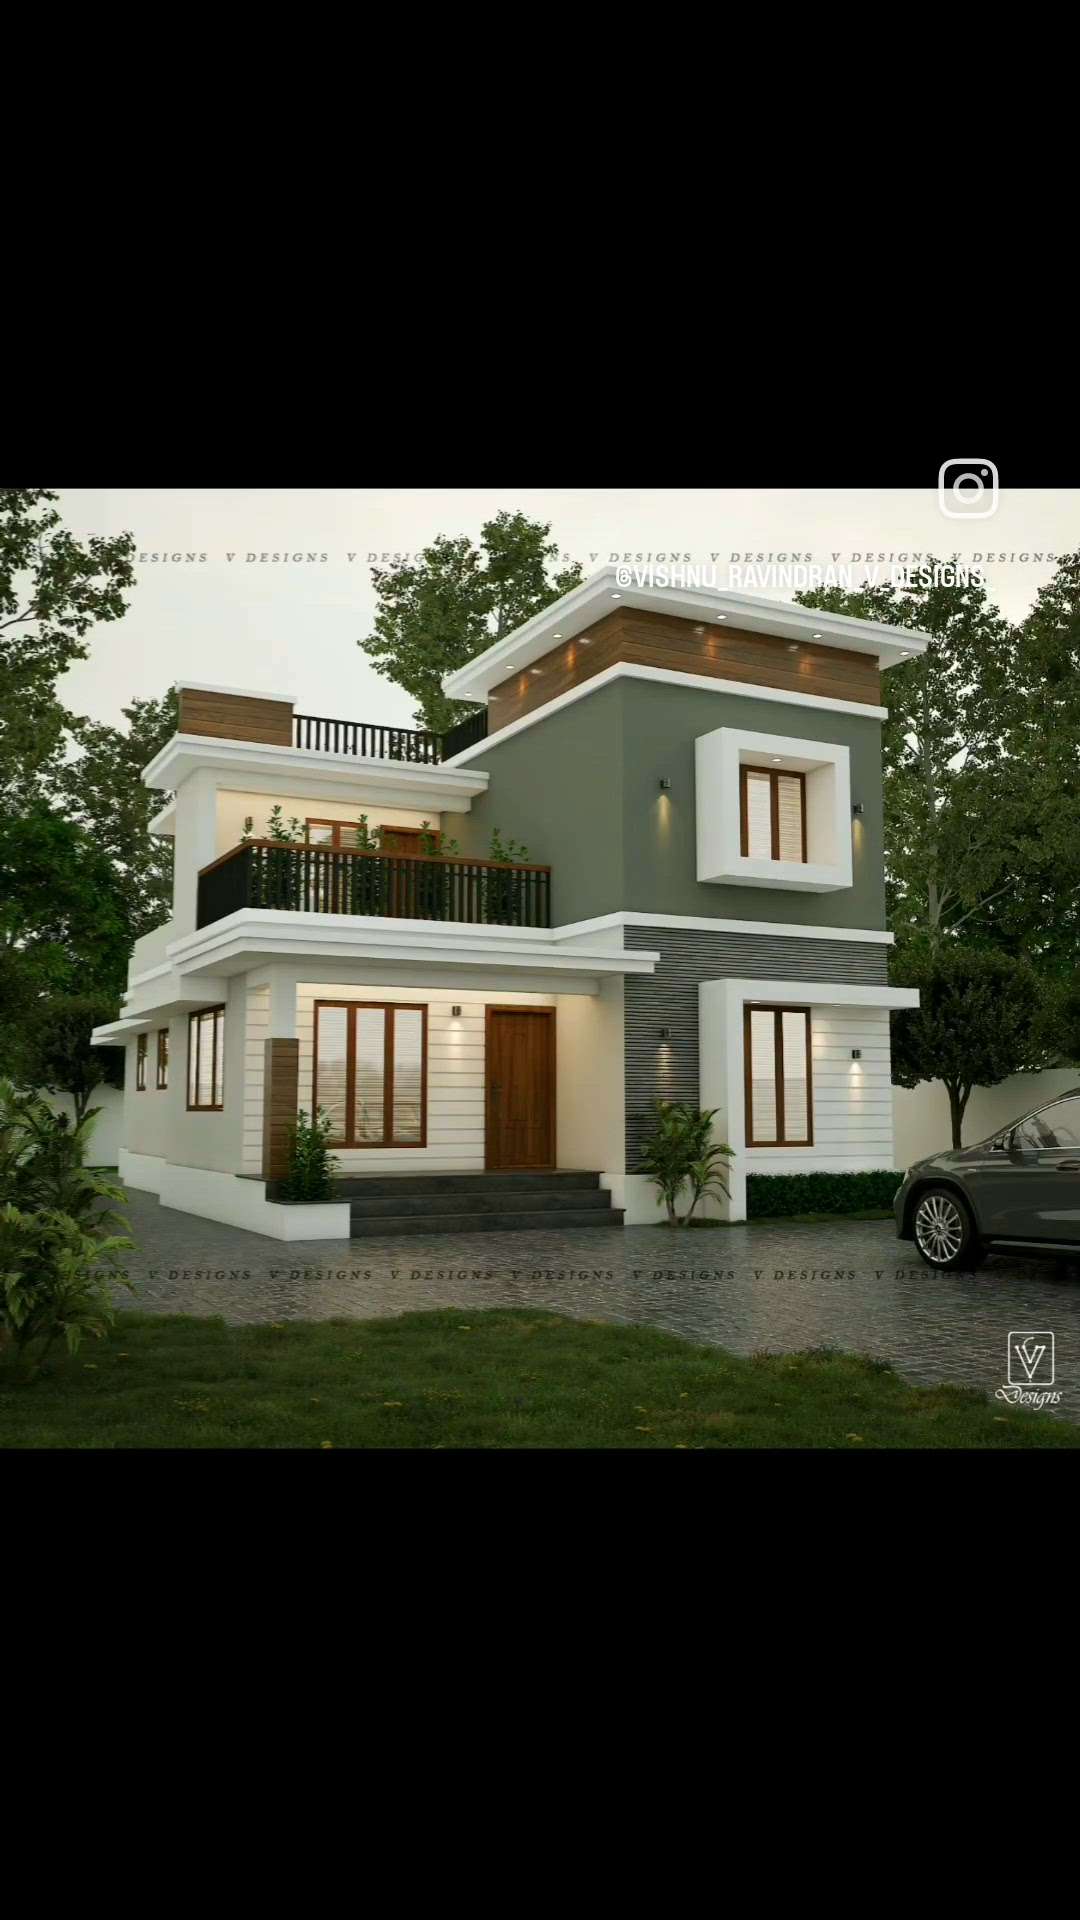 3 Bhk home Design 🏡  details 👇🏻

Designer :
@vishnu_ravindran_v_designs_

All Kerala Full finish contract Available 🏠

More details please Message now ❤️

⭐️Brick ( ഇഷ്ടിക ) High quality strength aprox ₹10 or above rate brick only used.

⭐️Teak wood or wpc doors & windows
⭐️High quality steel
⭐️High quality electrical & plumbing
⭐️Flooring ₹80/Sqft
⭐️Toilet :  Branded Jaguar fittings
⭐️Water tank 1000 L capacity
⭐️Two coat Putty, one coat primer with emulsion.
⭐️Interior Wardrobs & furnishing including

Cleint :  Sujith , Nadathara.Thrissur 

1750 Sqft
3 bhk 
Aprox : 60 L

. follow more 👉 @vishnu_ravindran_v_designs_

#kerala #keralahomes #keralahomedesigns
#budgethomes #budgethome
#smallhome
#contemporaryhouse
#contemporarydesigns
#homeconcept
#vanithaveedu #veedu #homeconcept #interiordesign #budgethomes #budgethome #designkerala #designerconcept #architecture #homes #homestyle #indiandesigner #indianarchitecture #india #reelsofkerala